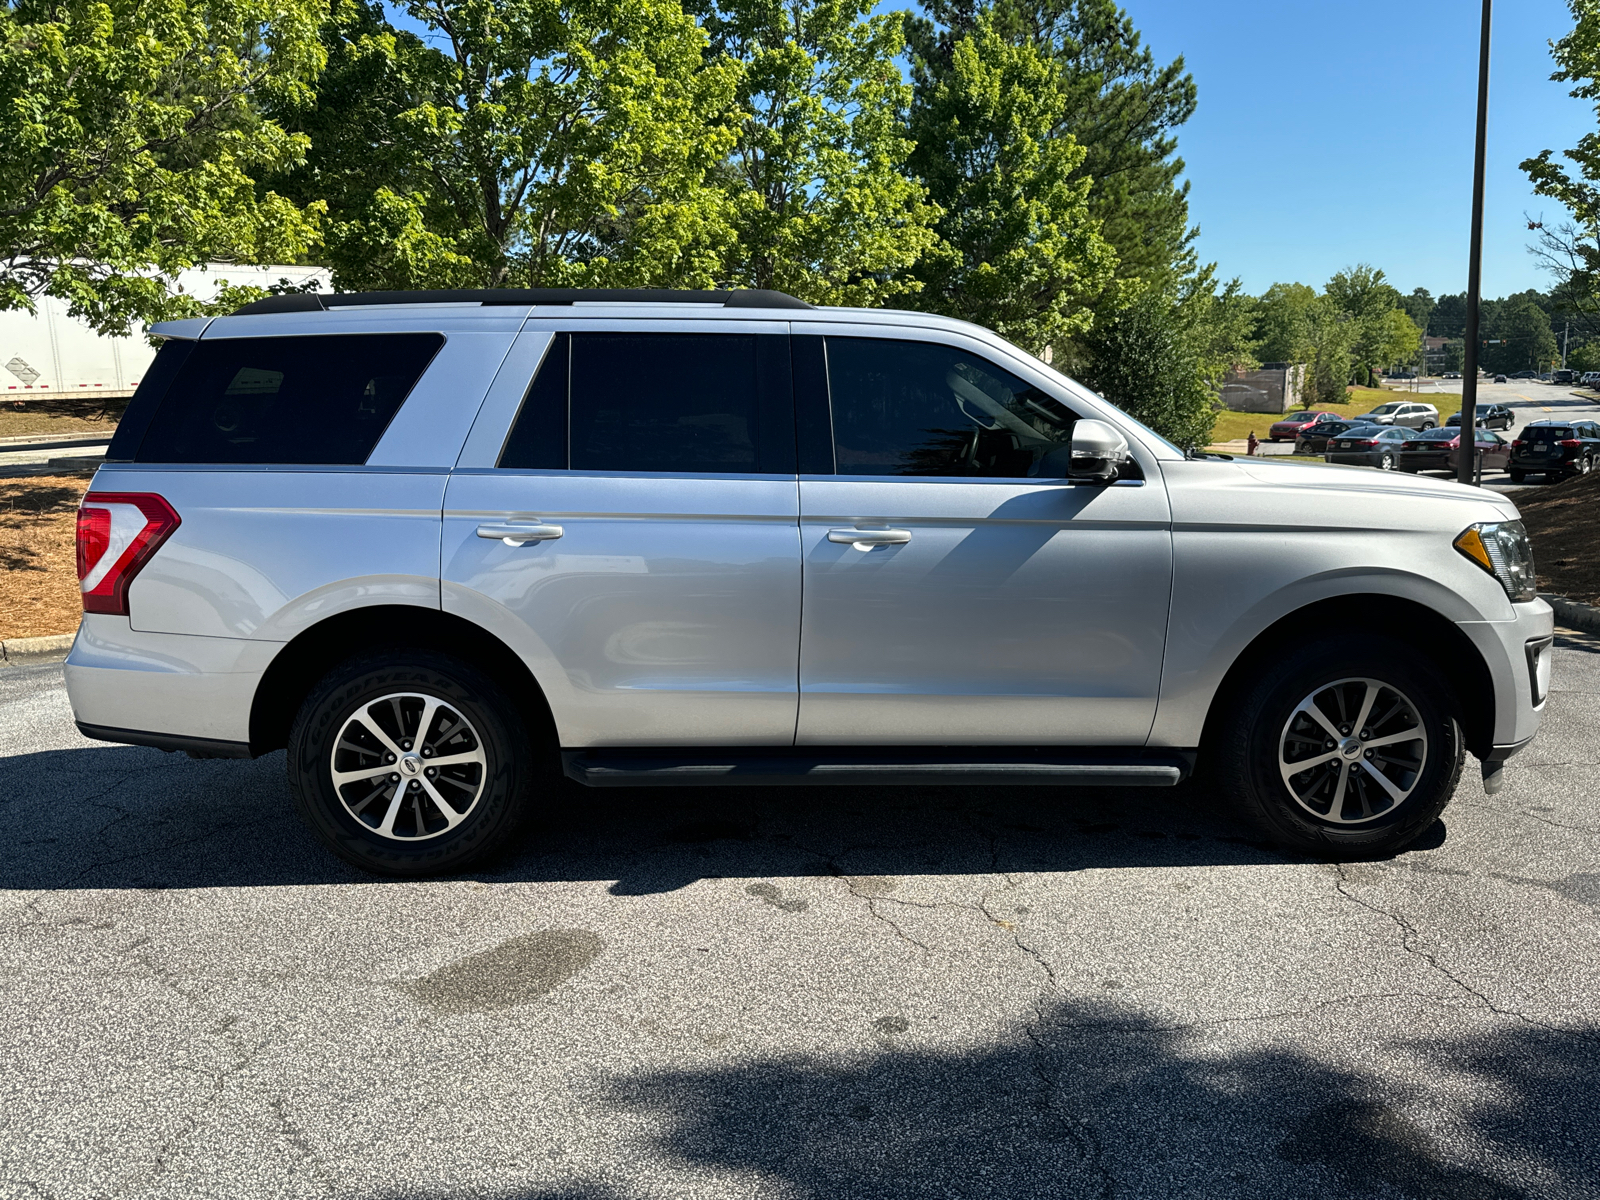 2019 Ford Expedition XLT 5